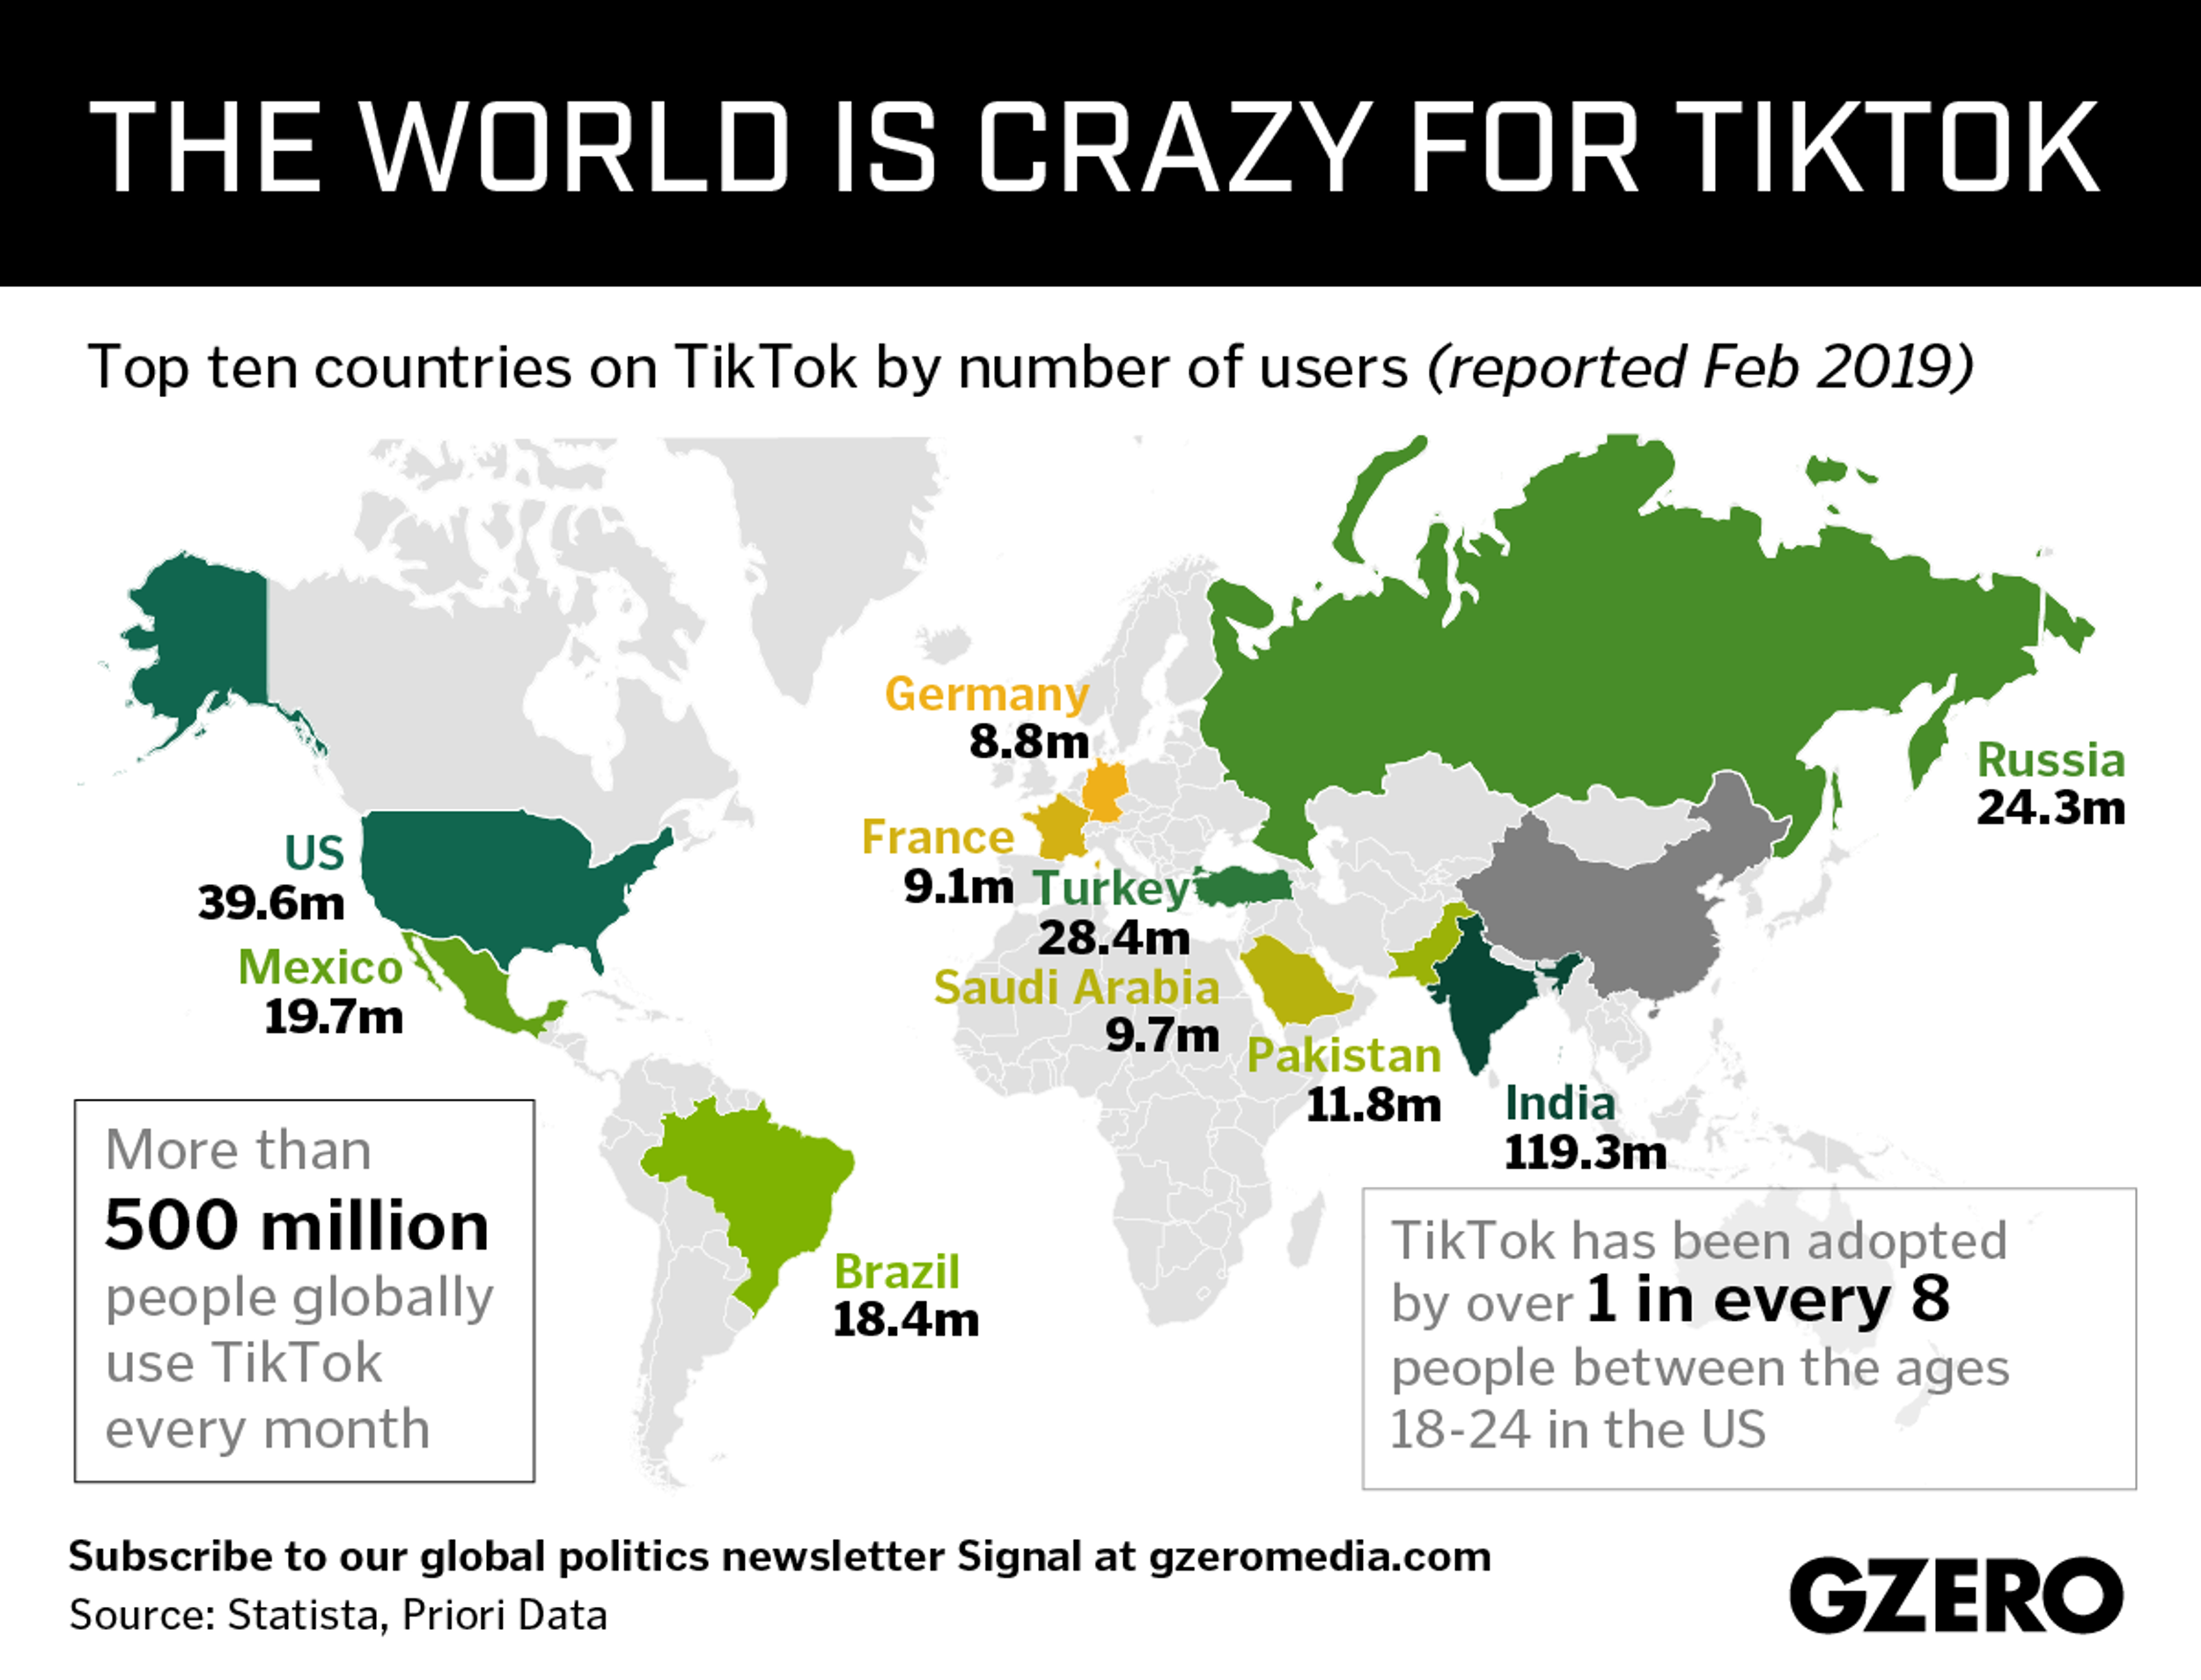 Graphic Truth: The world is crazy for TikTok